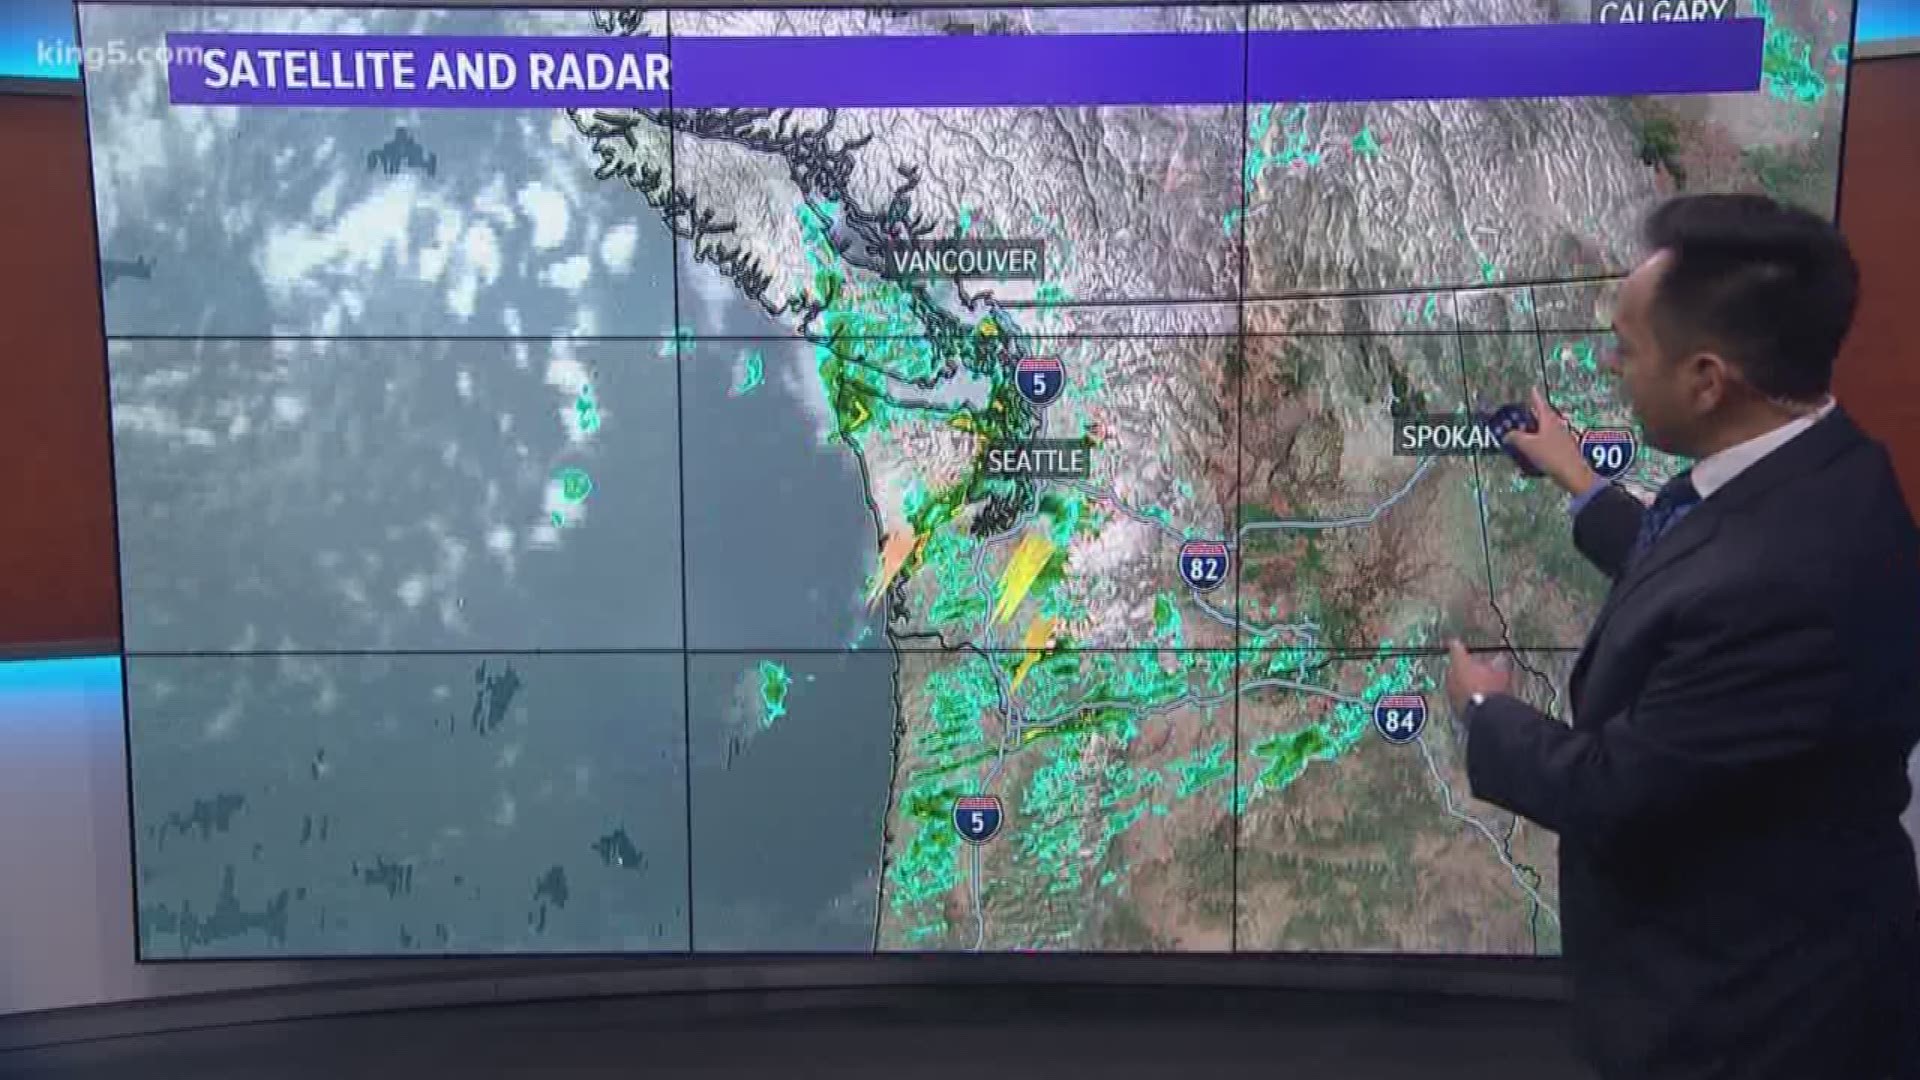 KING 5's Craig Hererra and Jordan Steele explain how a tornado formed in Western Washington and what to expect tomorrow.